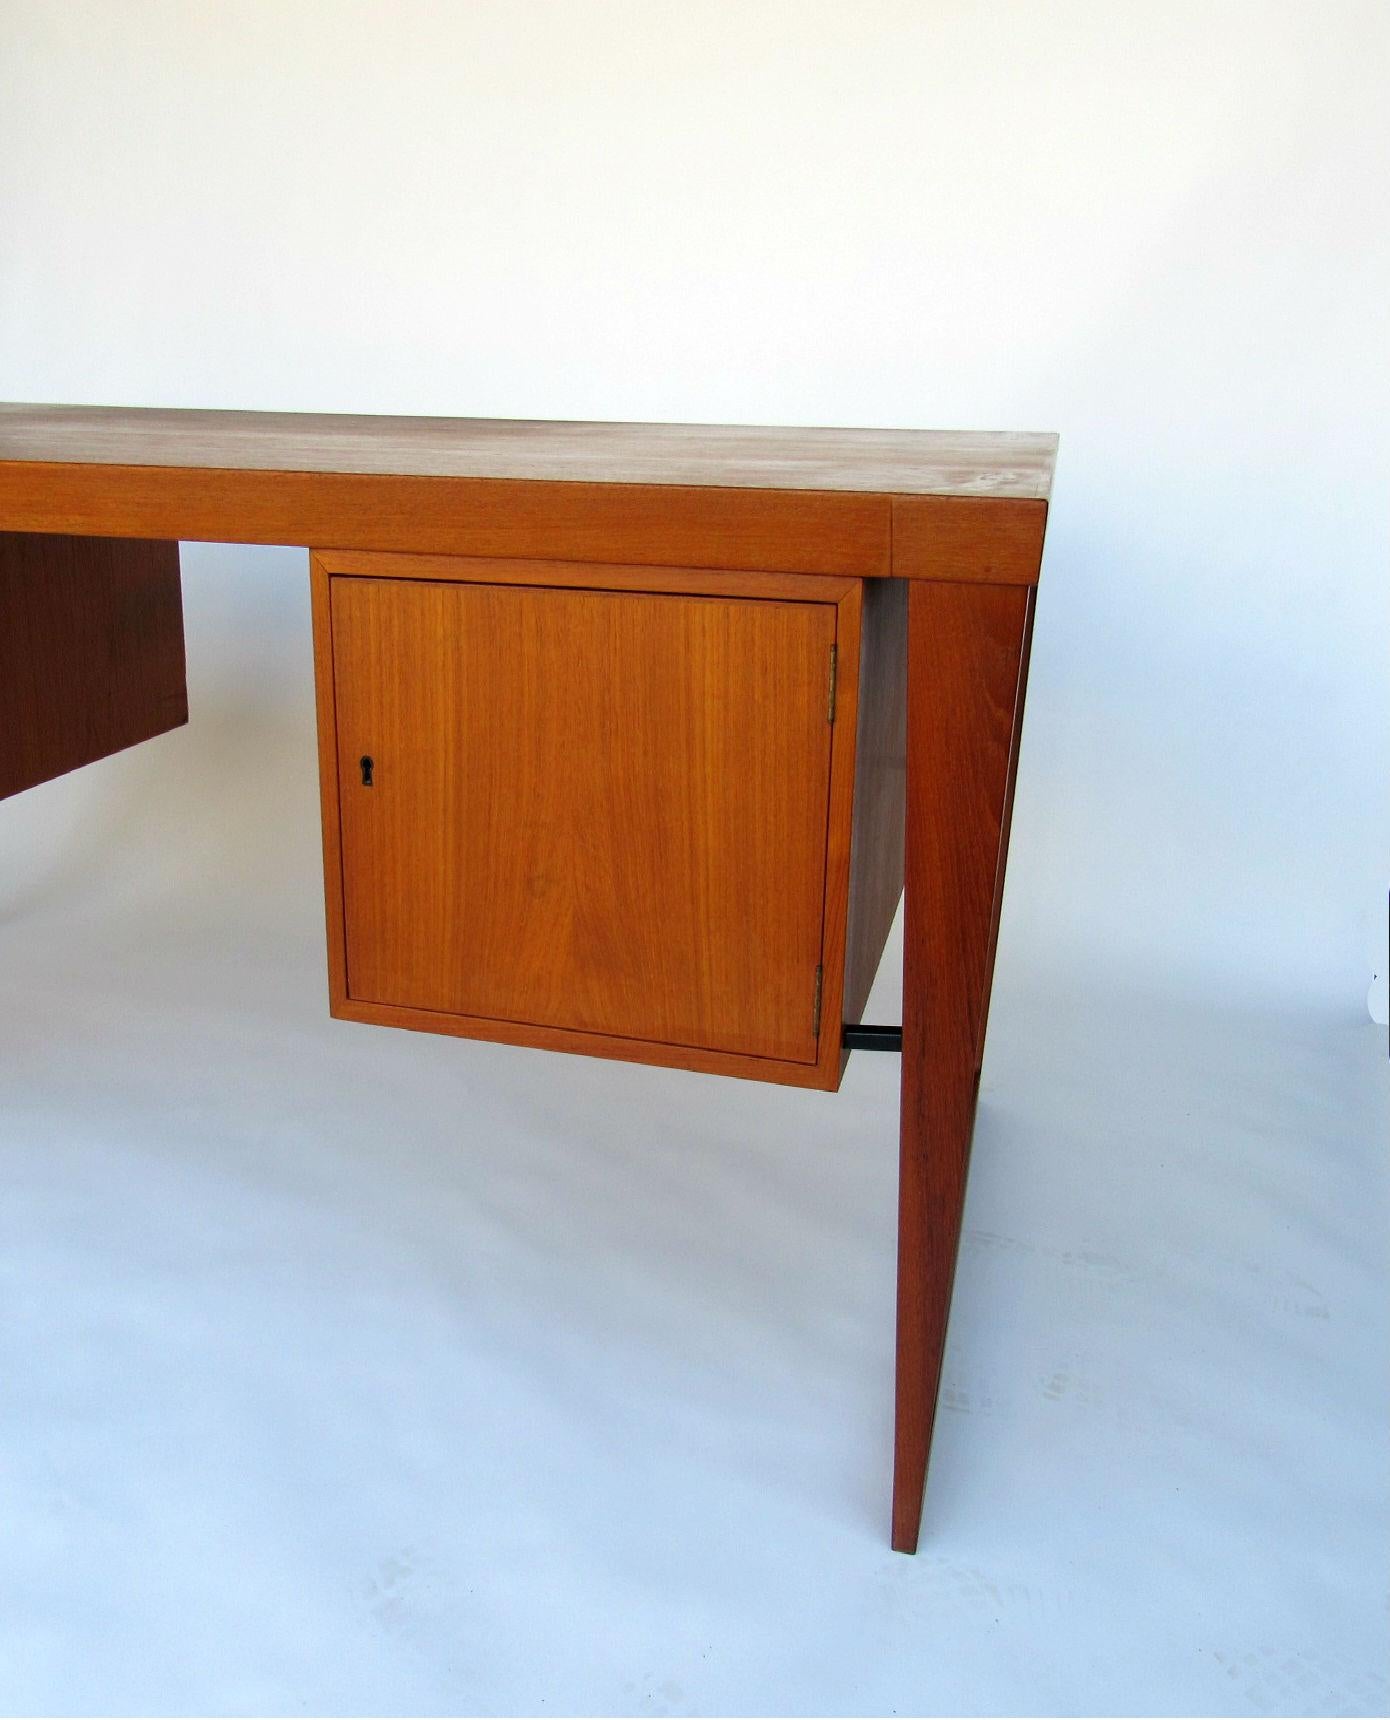 Kai Kristiansen Desk for FM Møbler.  Executive desk in teak with drawers on the backside and locking storage cabinets in the front. A sleek and functional superb example of Danish Modern design that provides ample storage, surface space, and